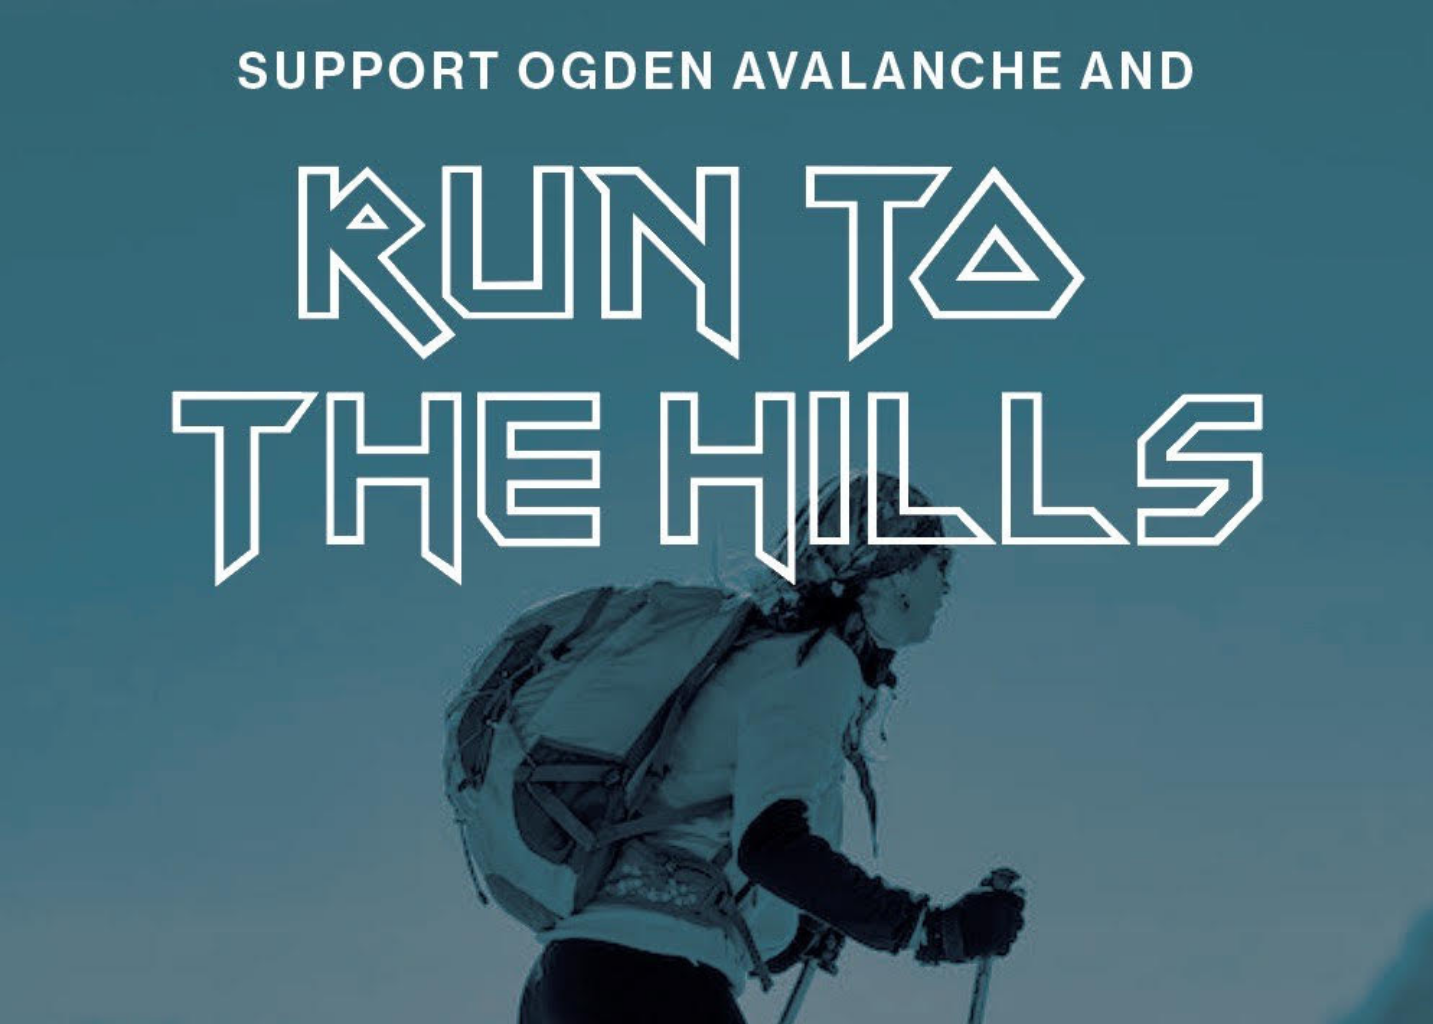 Run To The Hills Skimo Race - March 20, 2021